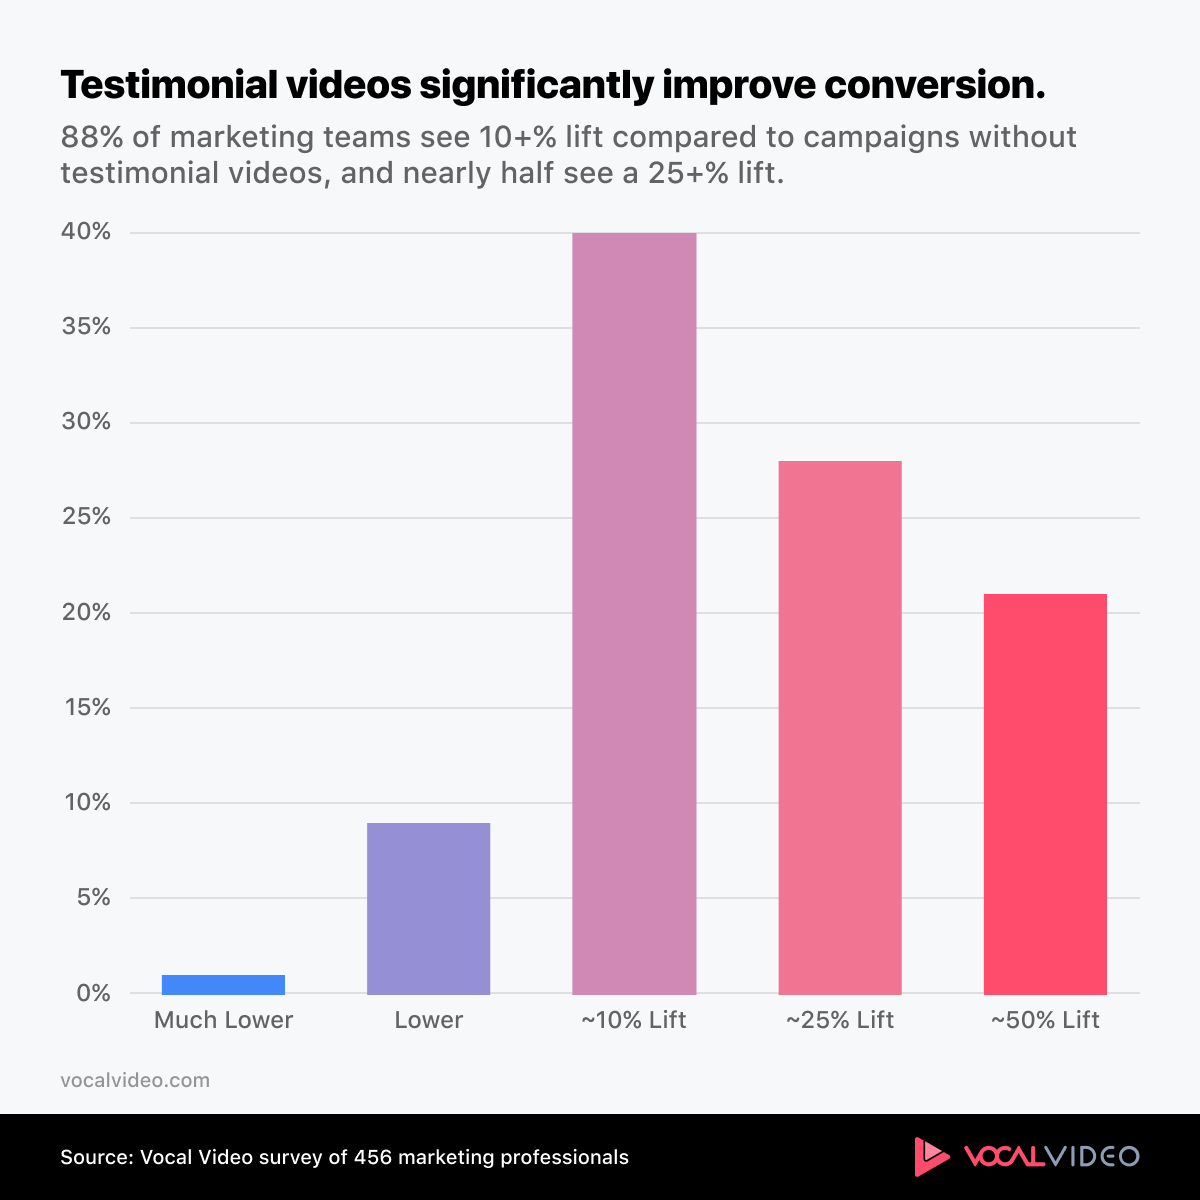 Testimonial videos significantly improve conversion: 88% of marketing teams see over a 10% lift compared to campaigns without testimonial video; nearly half see over a 25% lift.